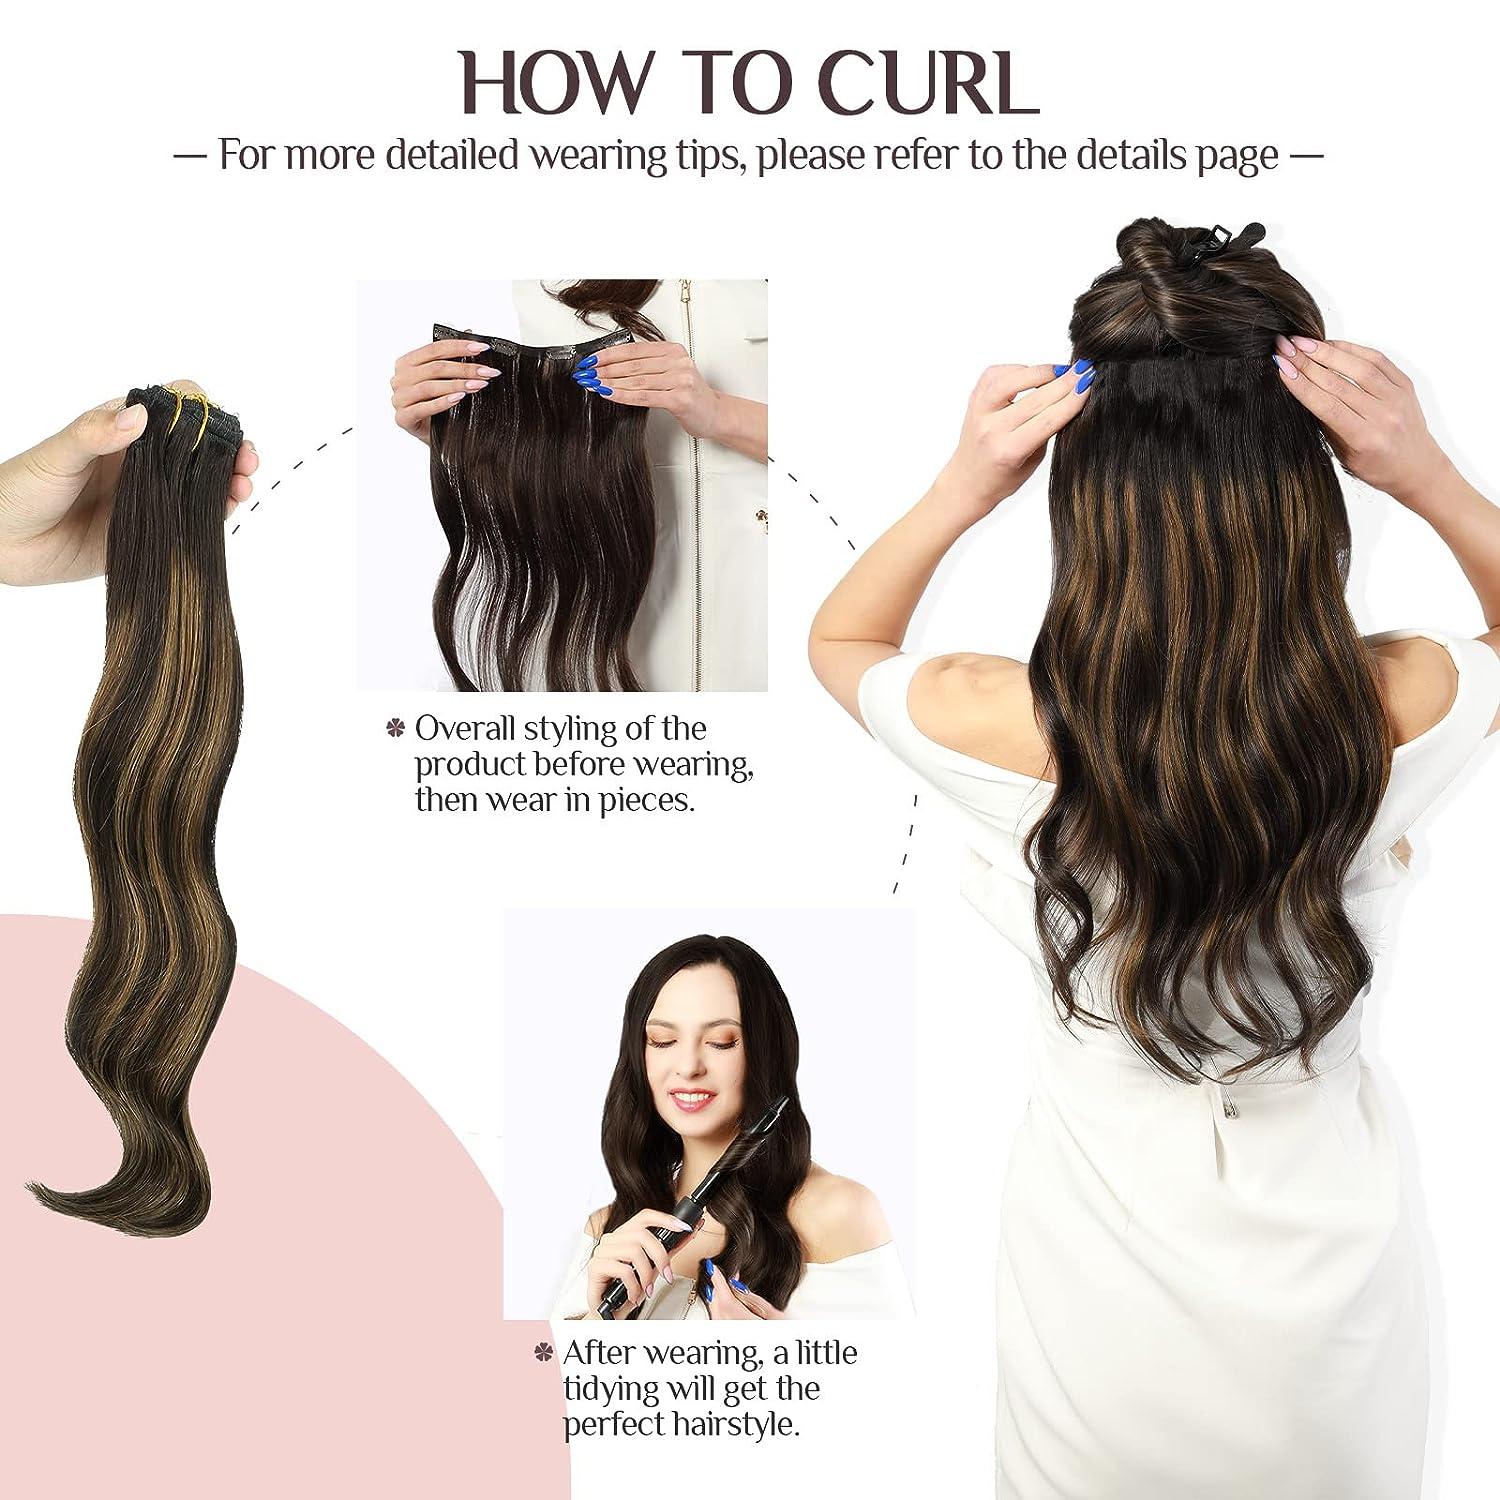 Hair Extension Care Guide, Remy Clips